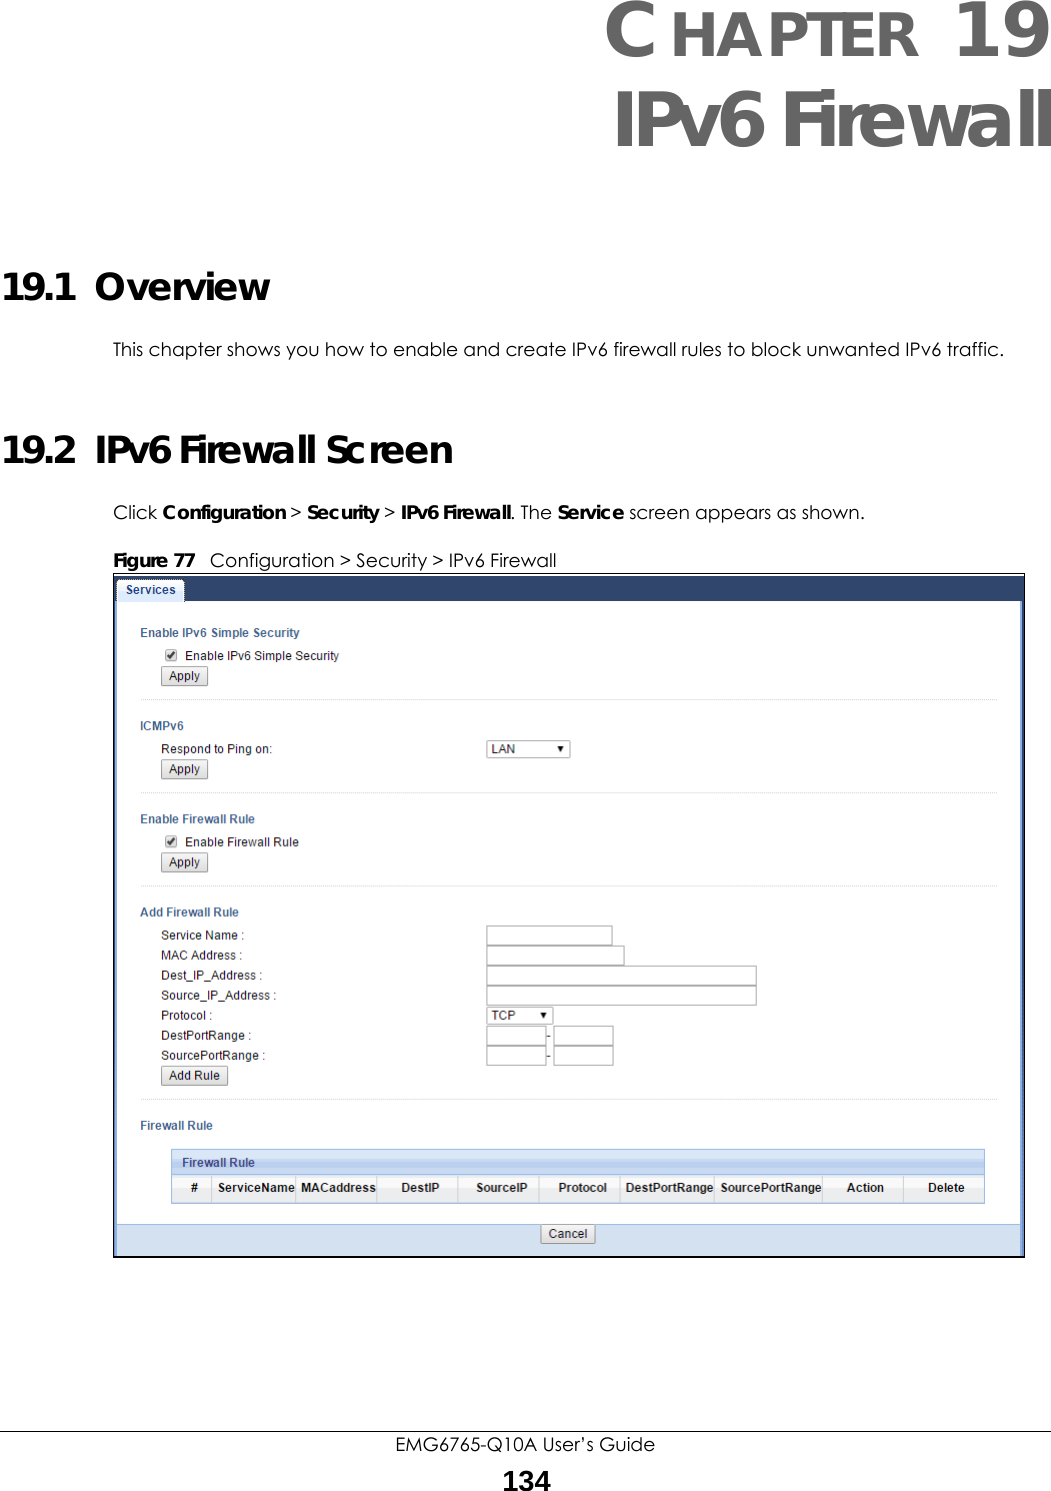 EMG6765-Q10A User’s Guide134CHAPTER 19IPv6 Firewall19.1  Overview This chapter shows you how to enable and create IPv6 firewall rules to block unwanted IPv6 traffic.19.2  IPv6 Firewall Screen Click Configuration &gt; Security &gt; IPv6 Firewall. The Service screen appears as shown.Figure 77   Configuration &gt; Security &gt; IPv6 Firewall